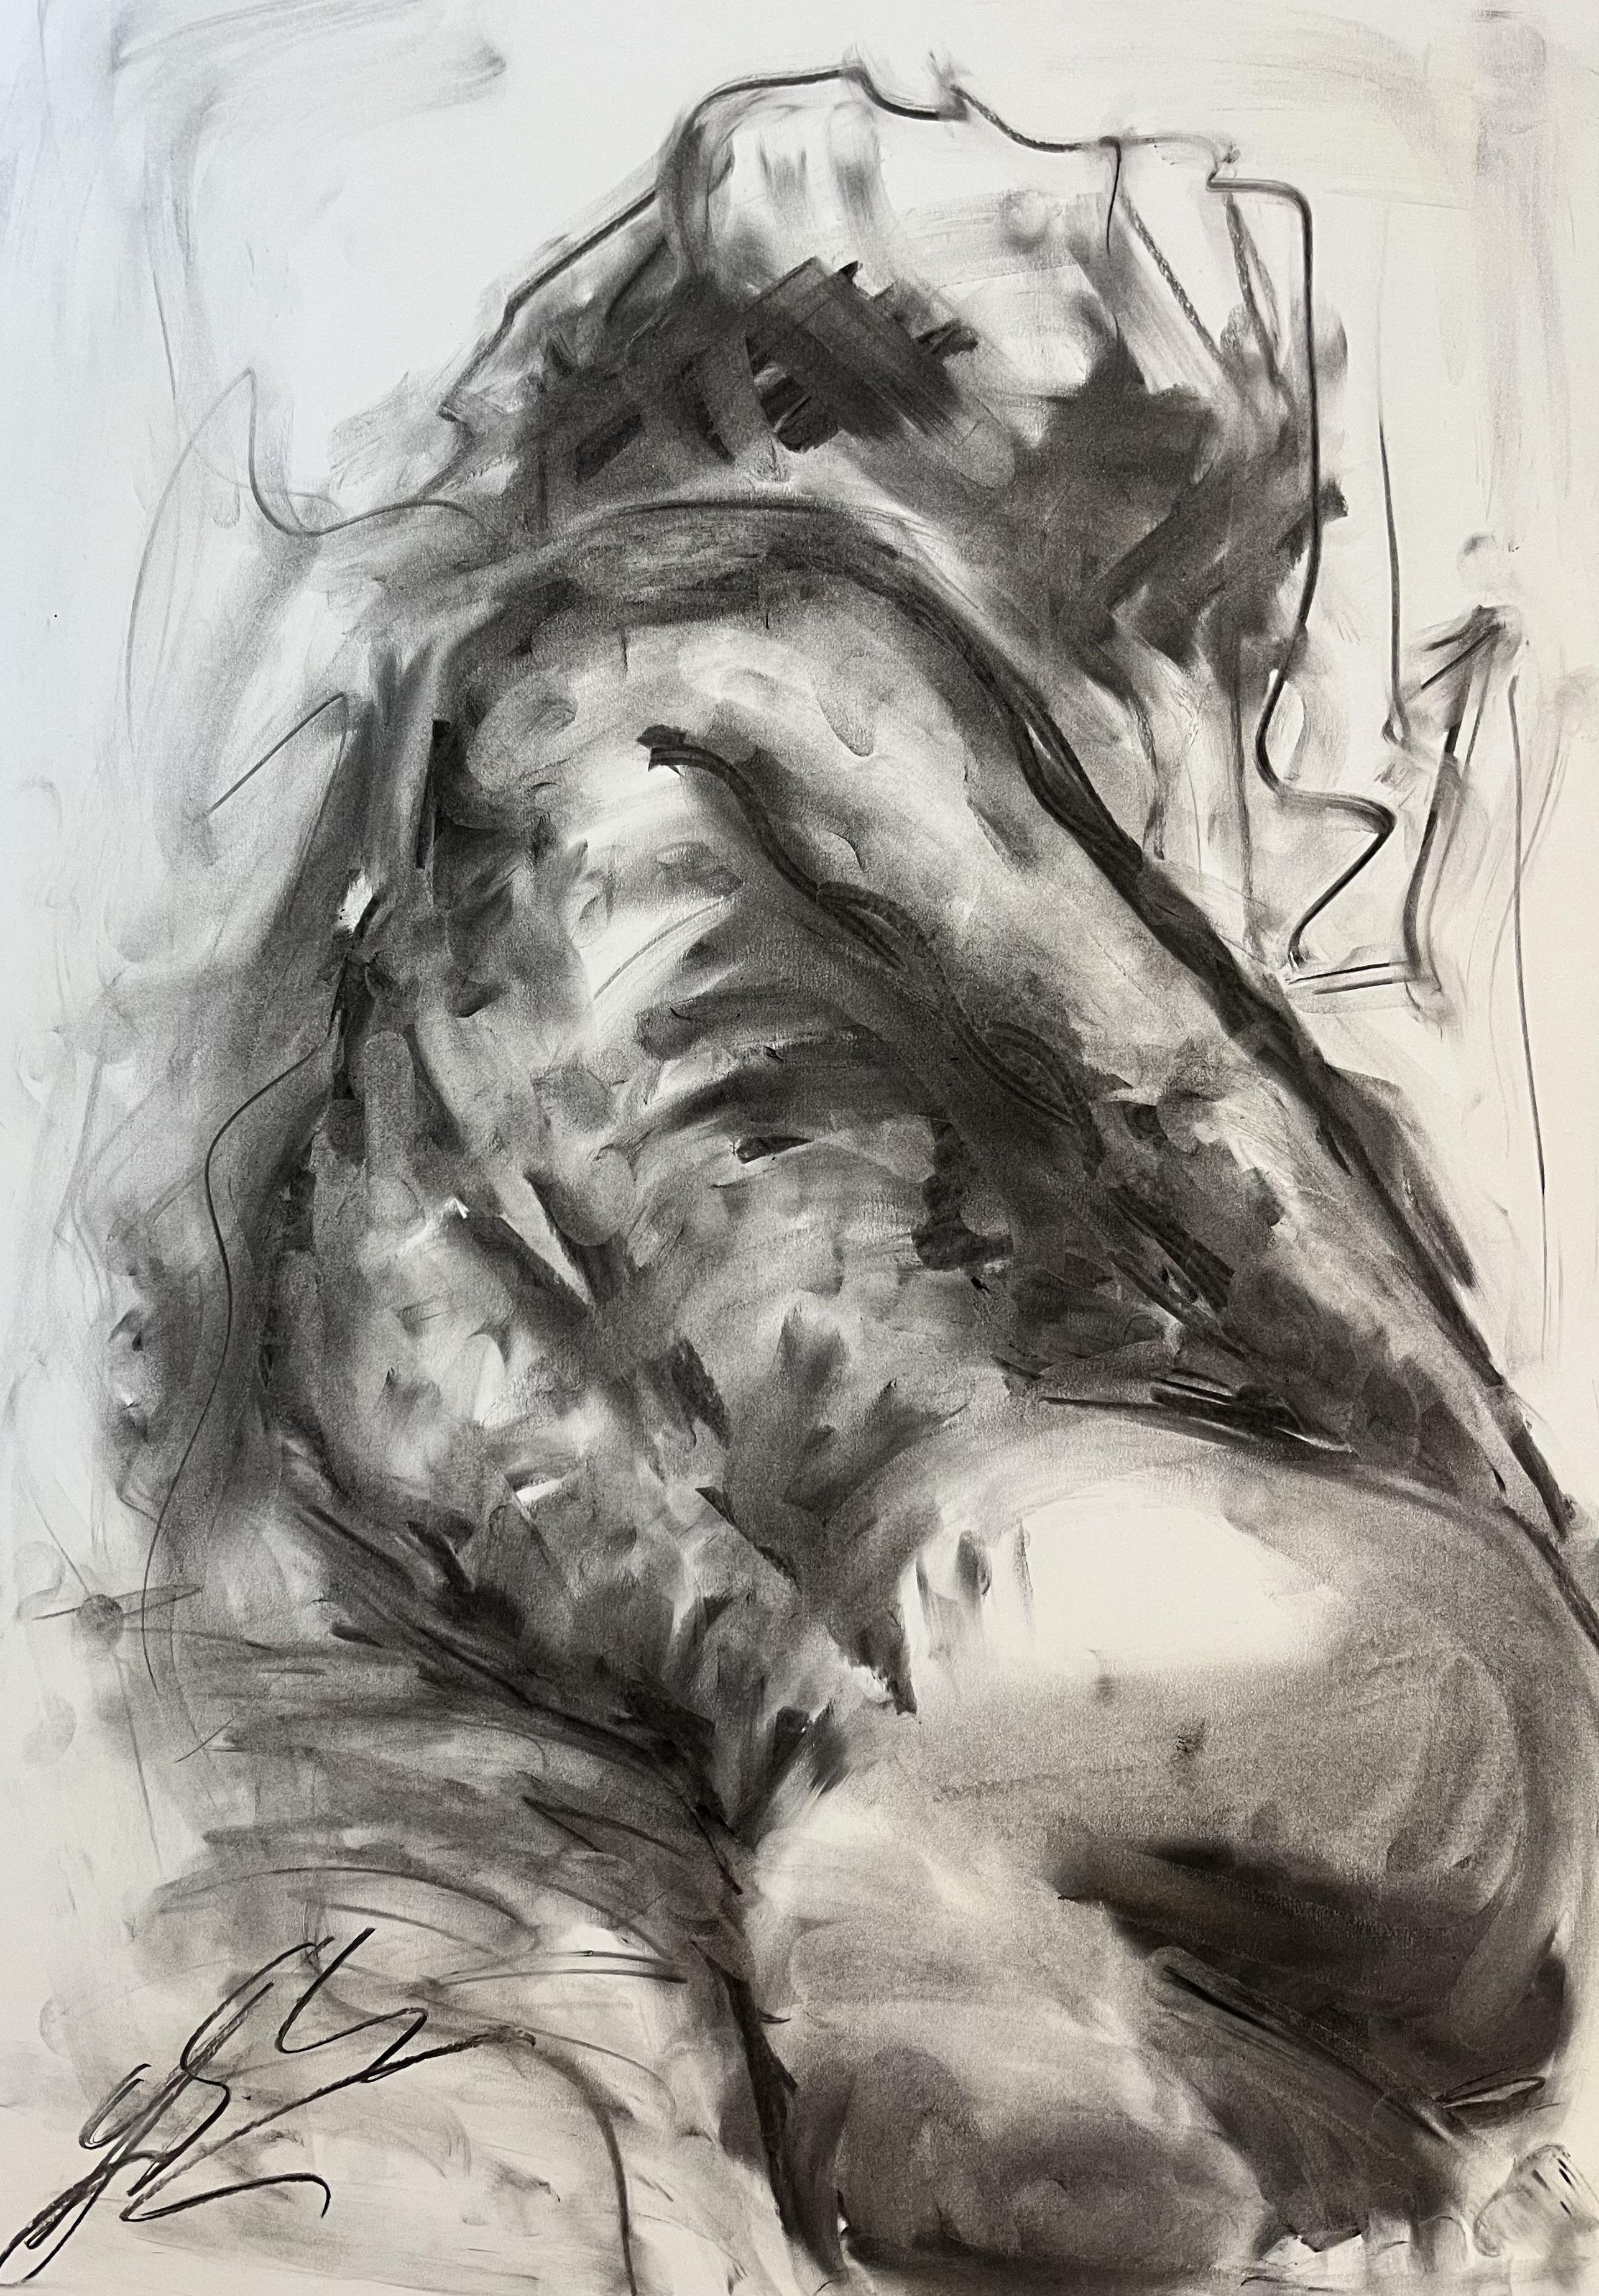 Unpredictable, Drawing, Charcoal on Paper - Art by James Shipton